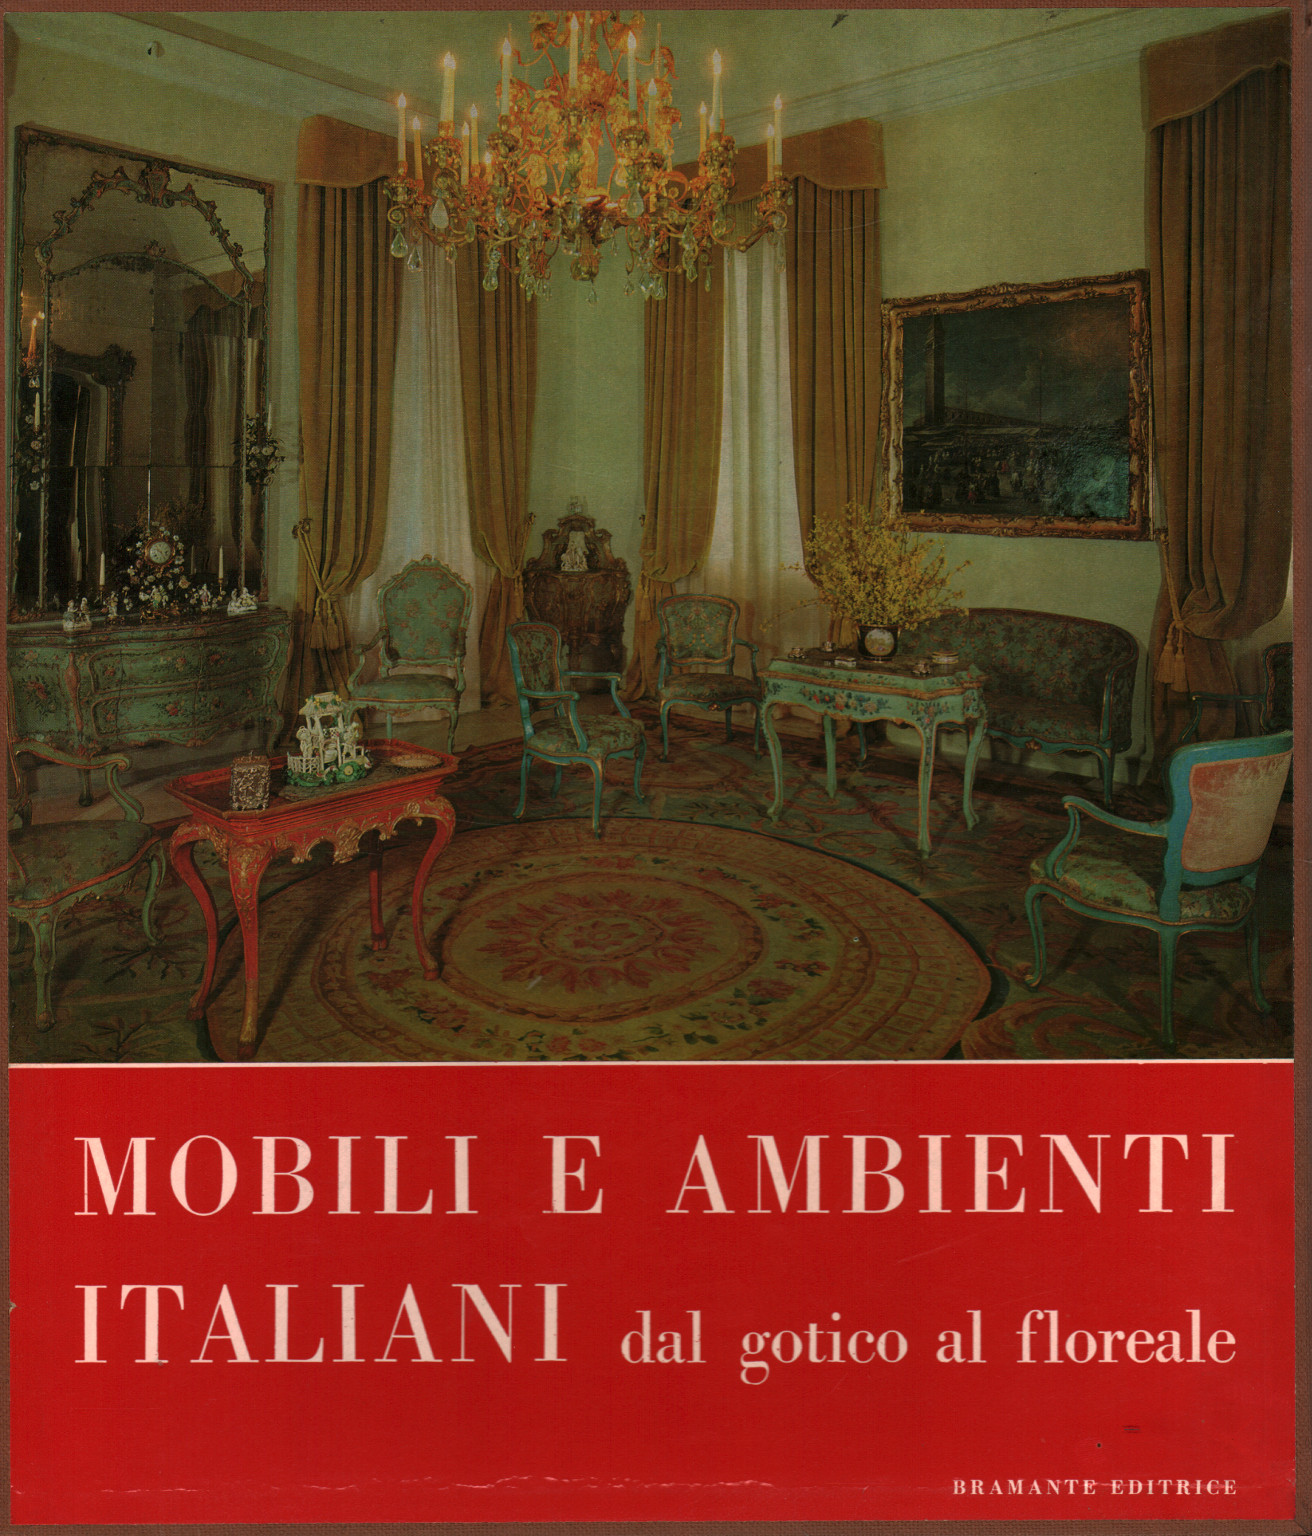 Furniture and Italian Environments from gothic to floral , s.a.